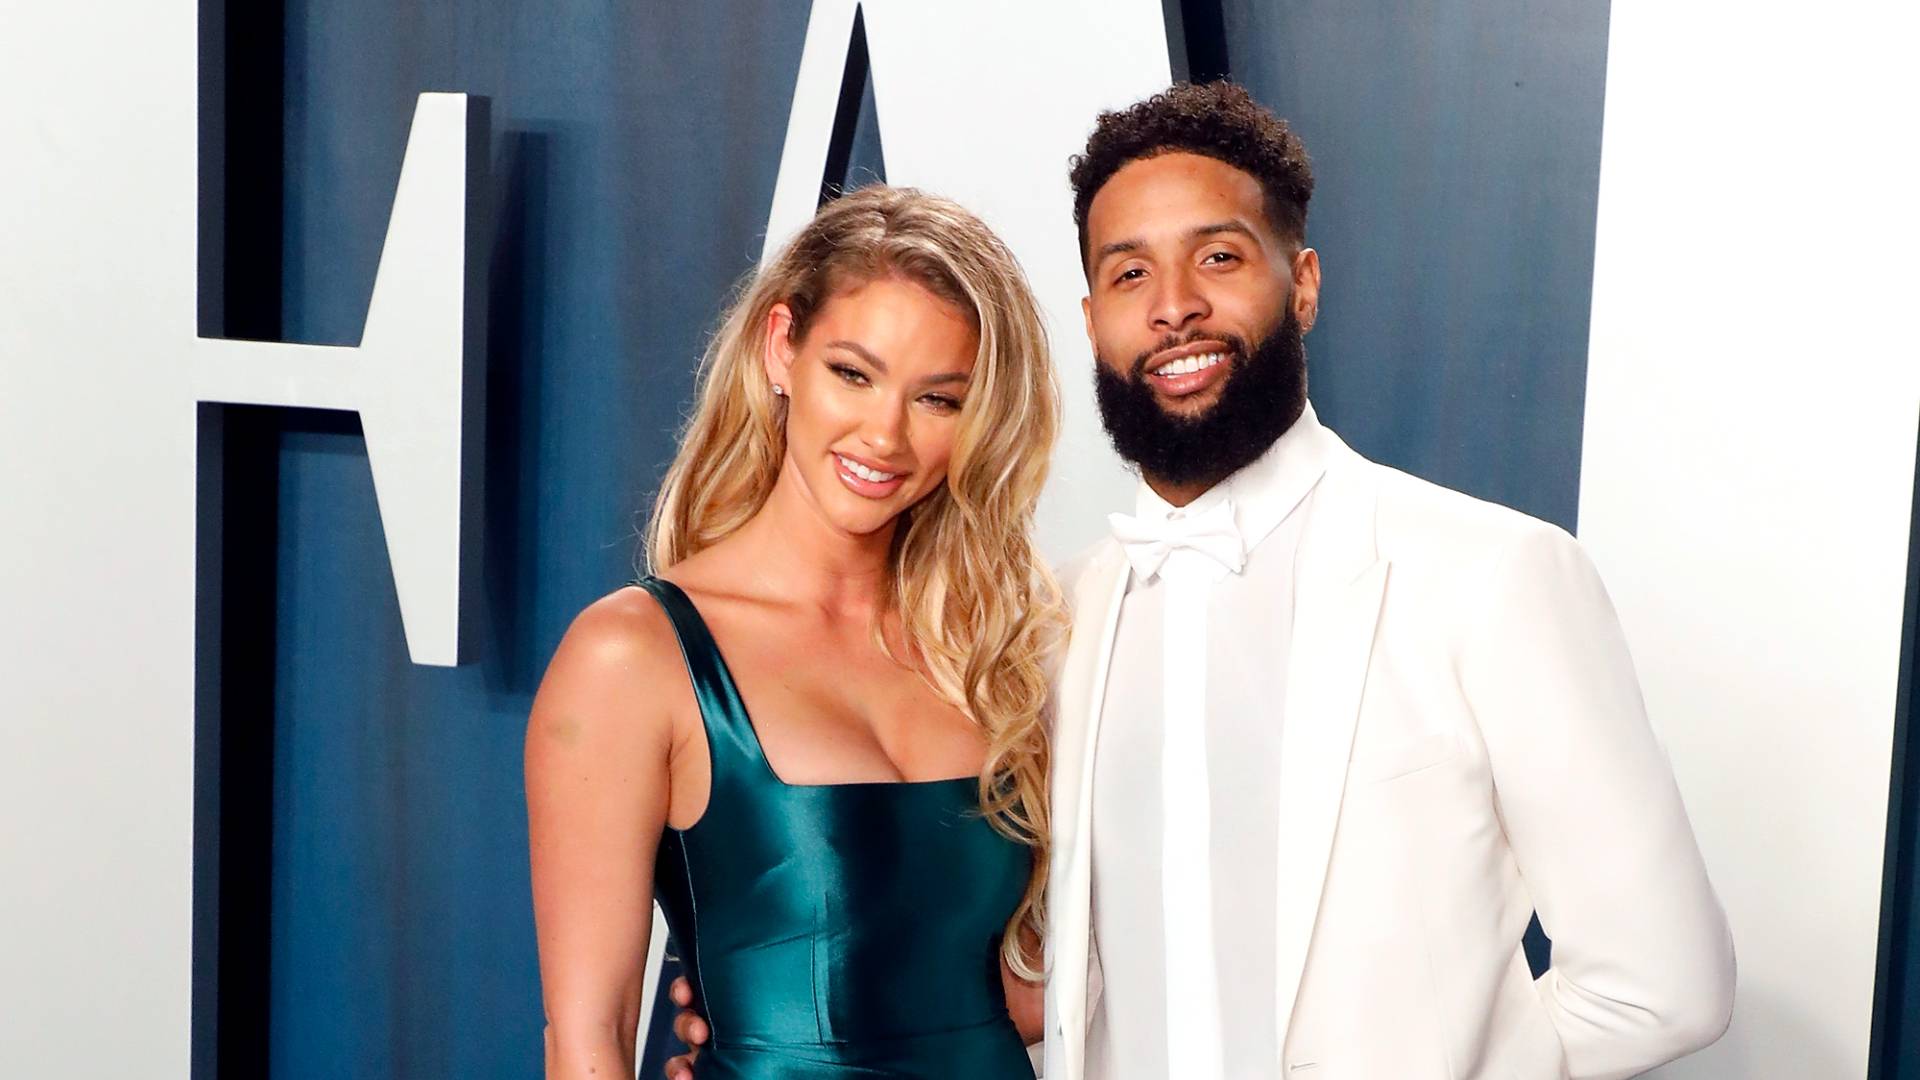 Lauren Wood and Odell Beckham Jr. attends the Vanity Fair Oscar Party at Wallis Annenberg Center for the Performing Arts on February 09, 2020 in Beverly Hills, California. 